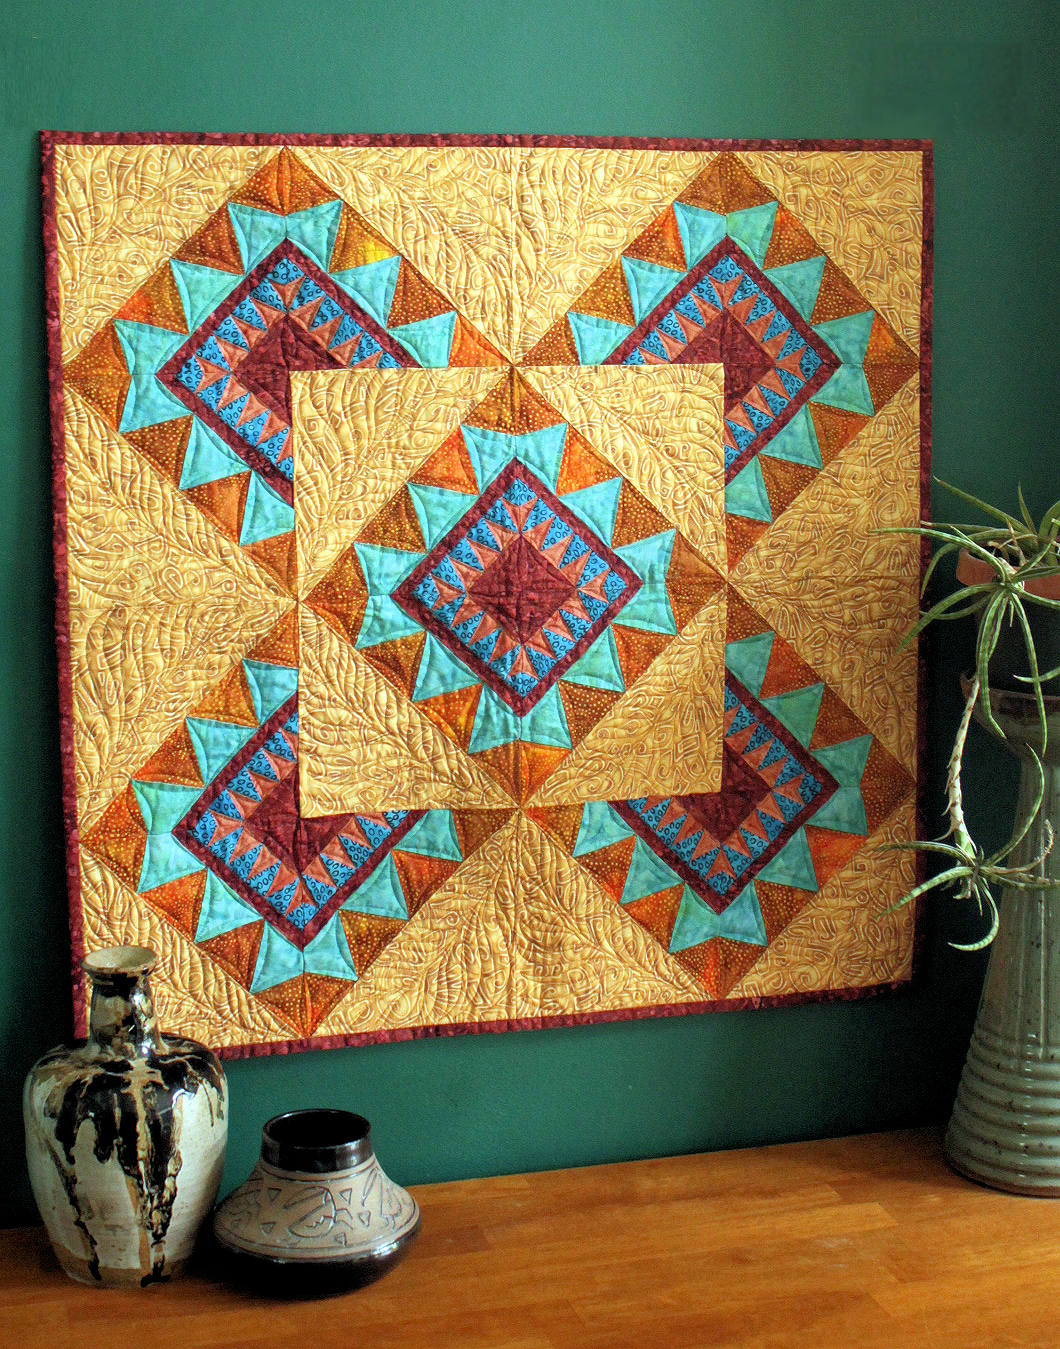 How to Hang a Quilt